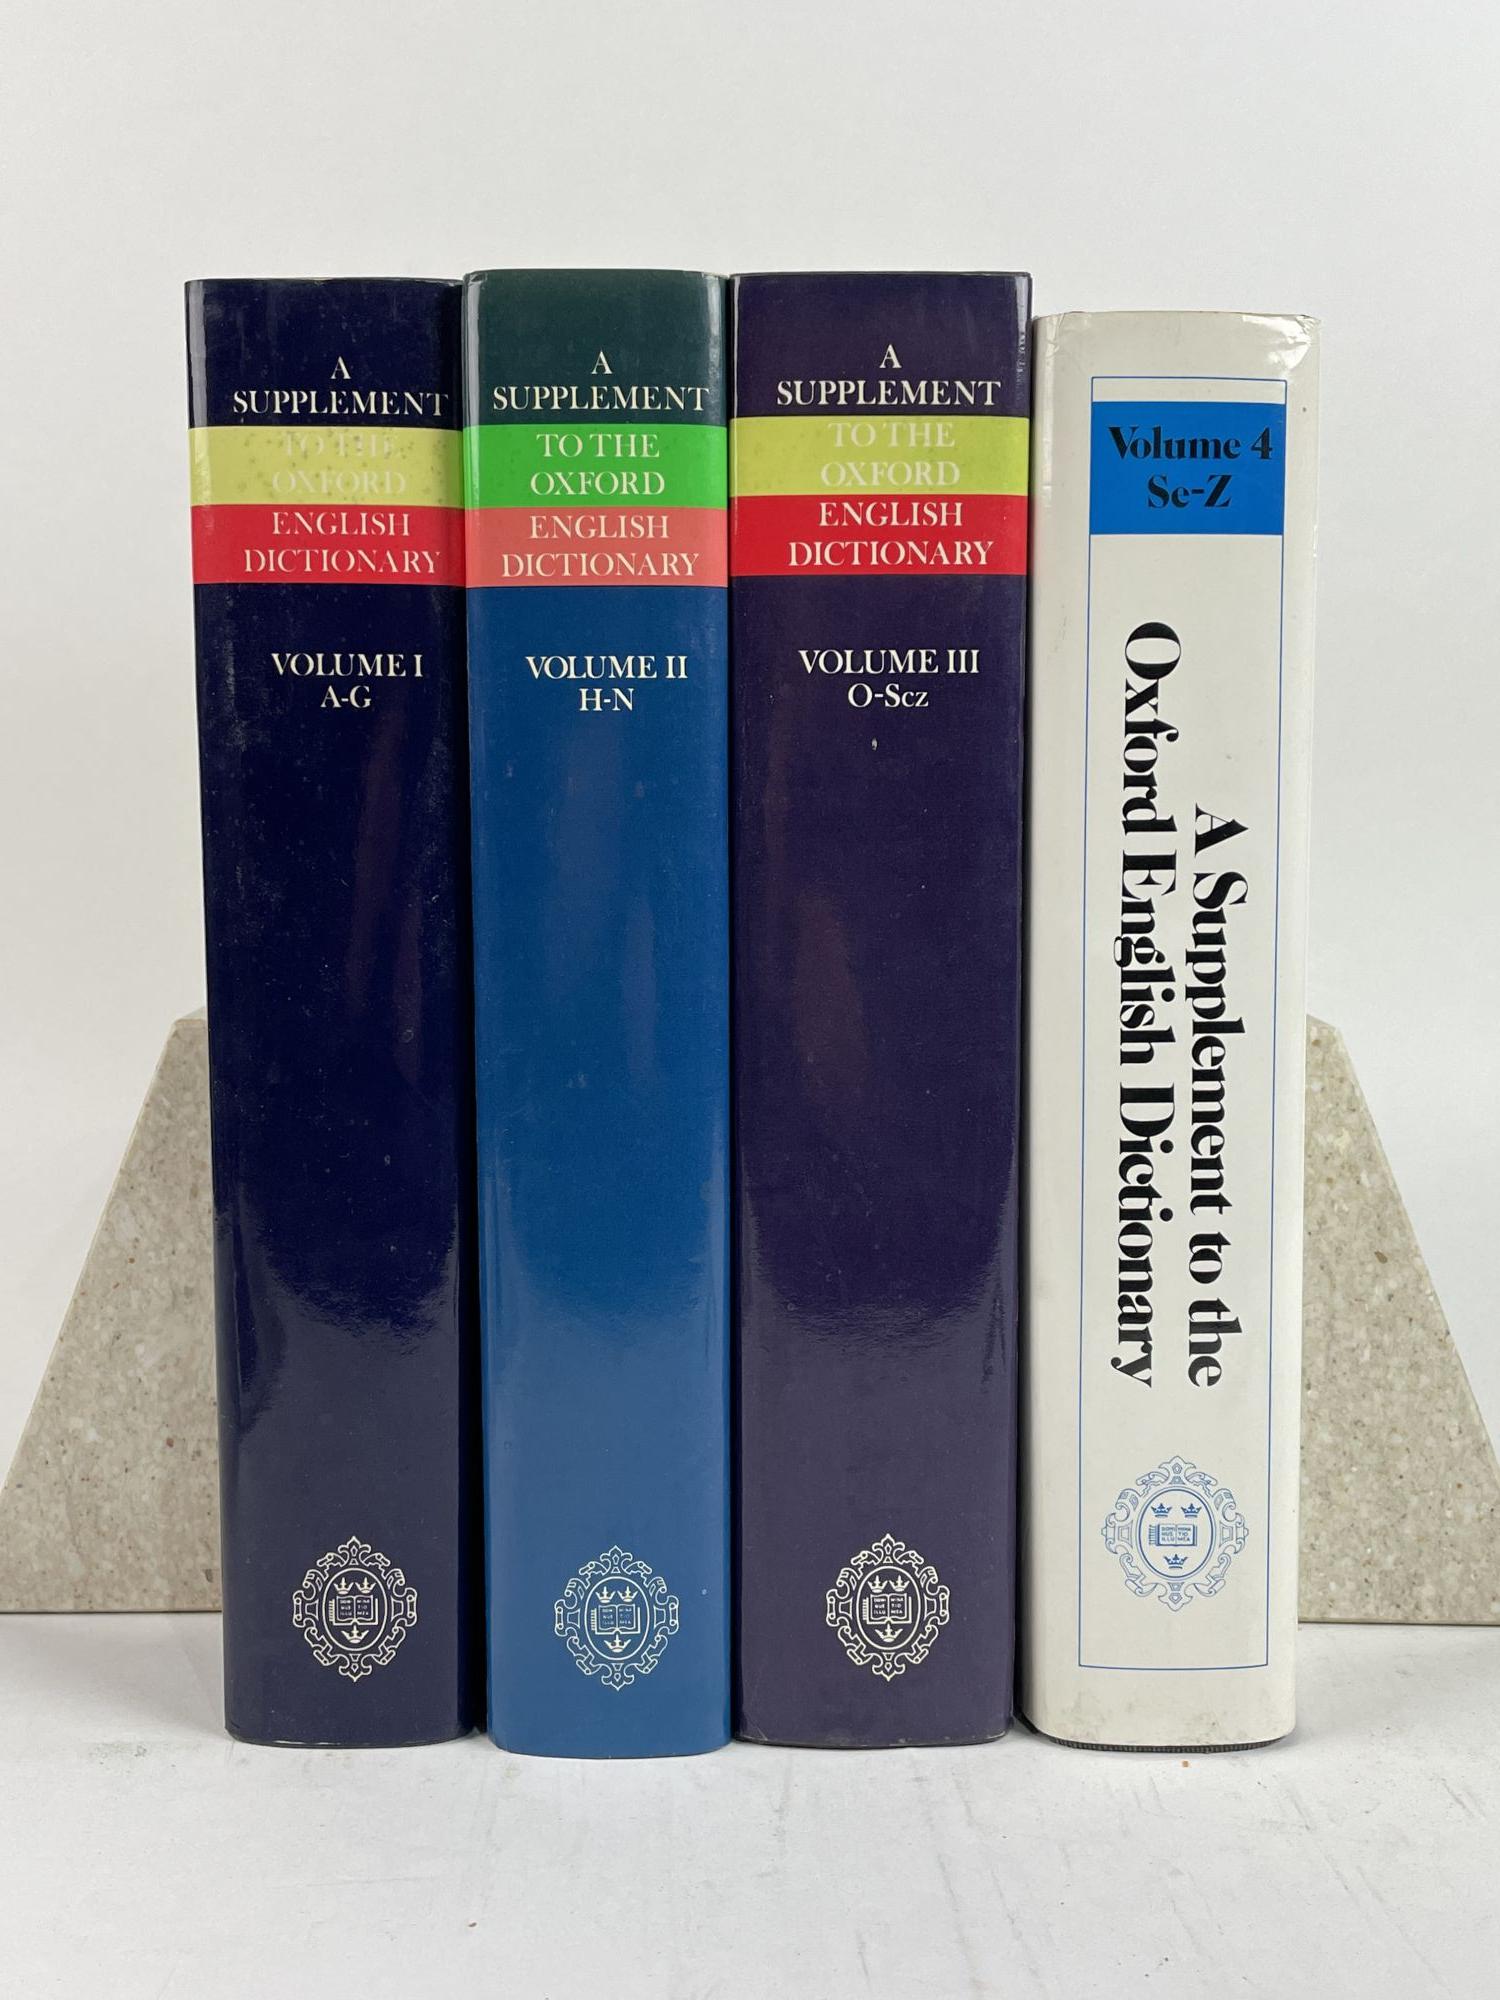 A SUPPLEMENT TO THE OXFORD ENGLISH DICTIONARY Four Volumes, Complete by R.  W. Burchfield